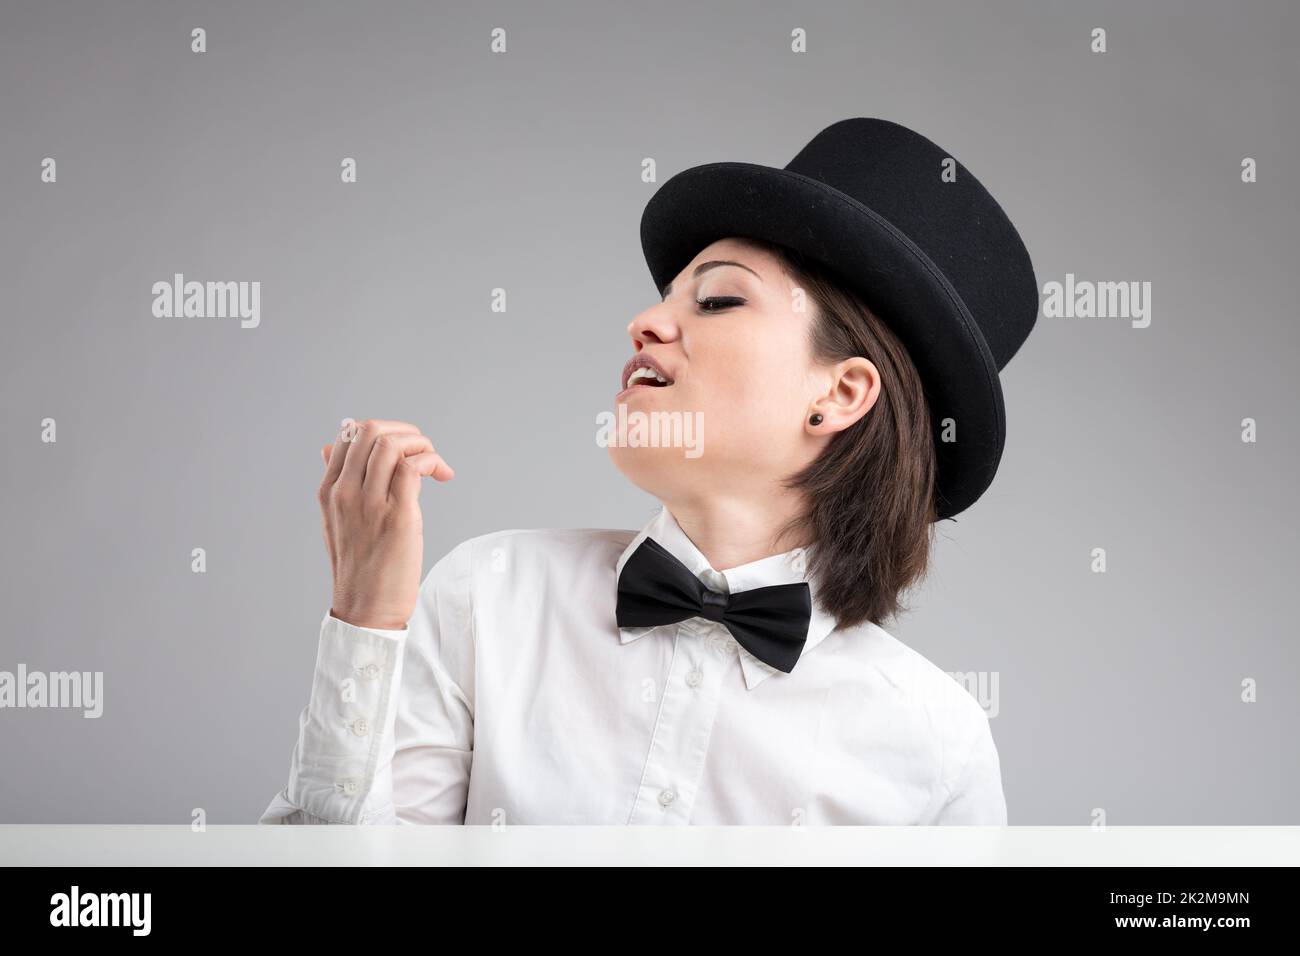 vain woman in top hat showing herself off Stock Photo